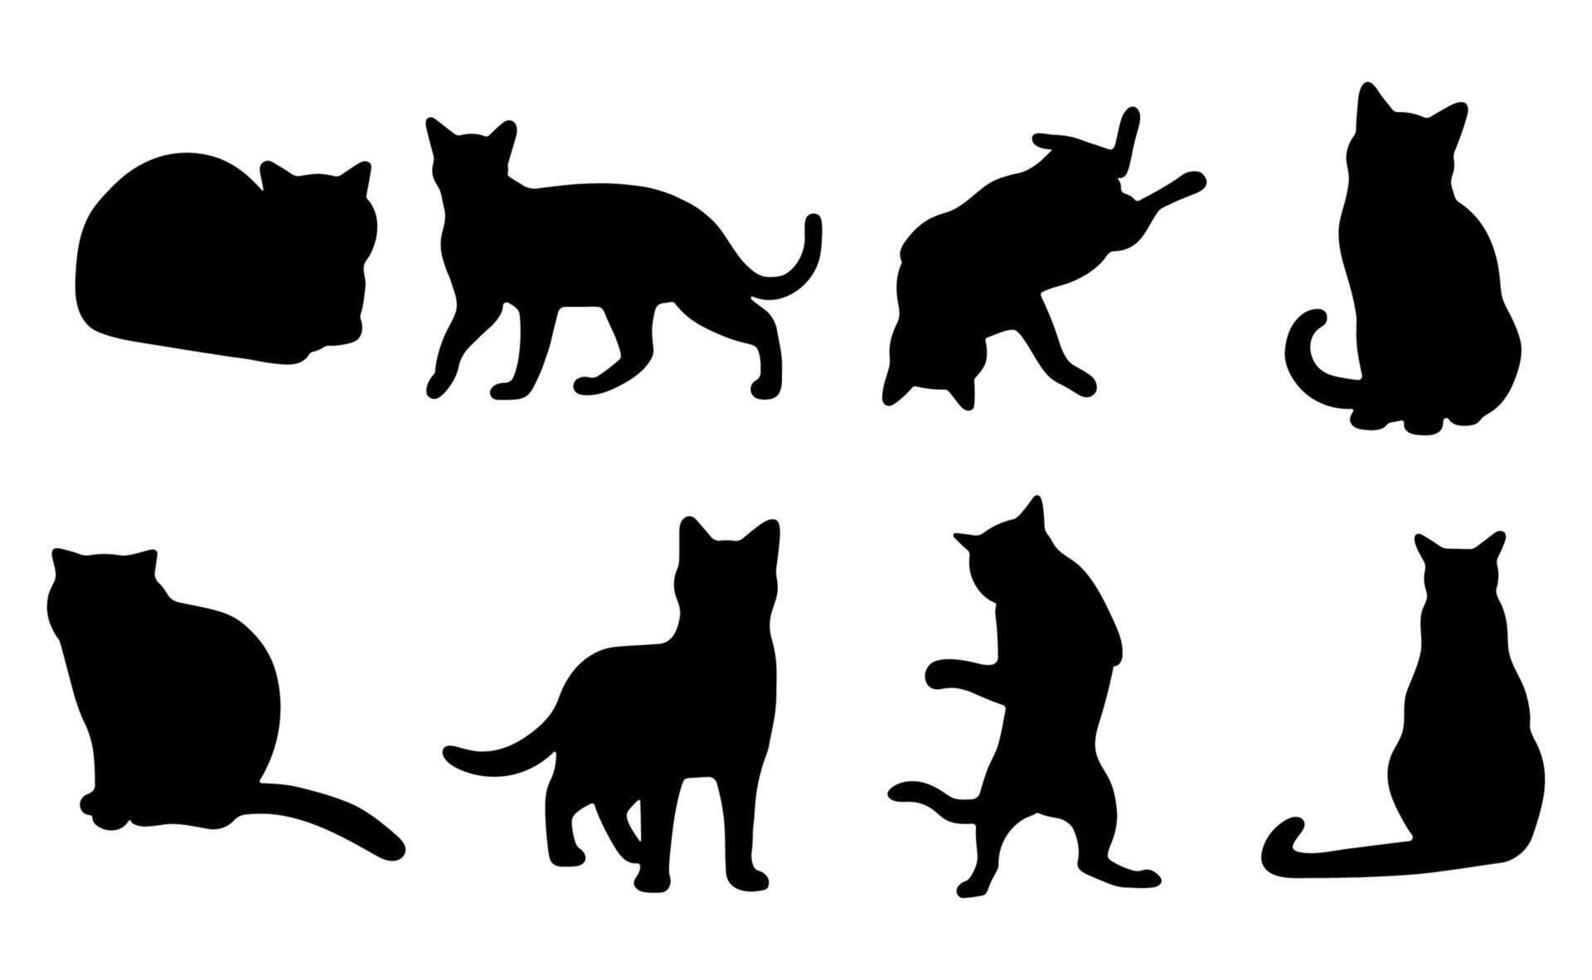 Cat shadow 1 cute on a white background, illustration. vector